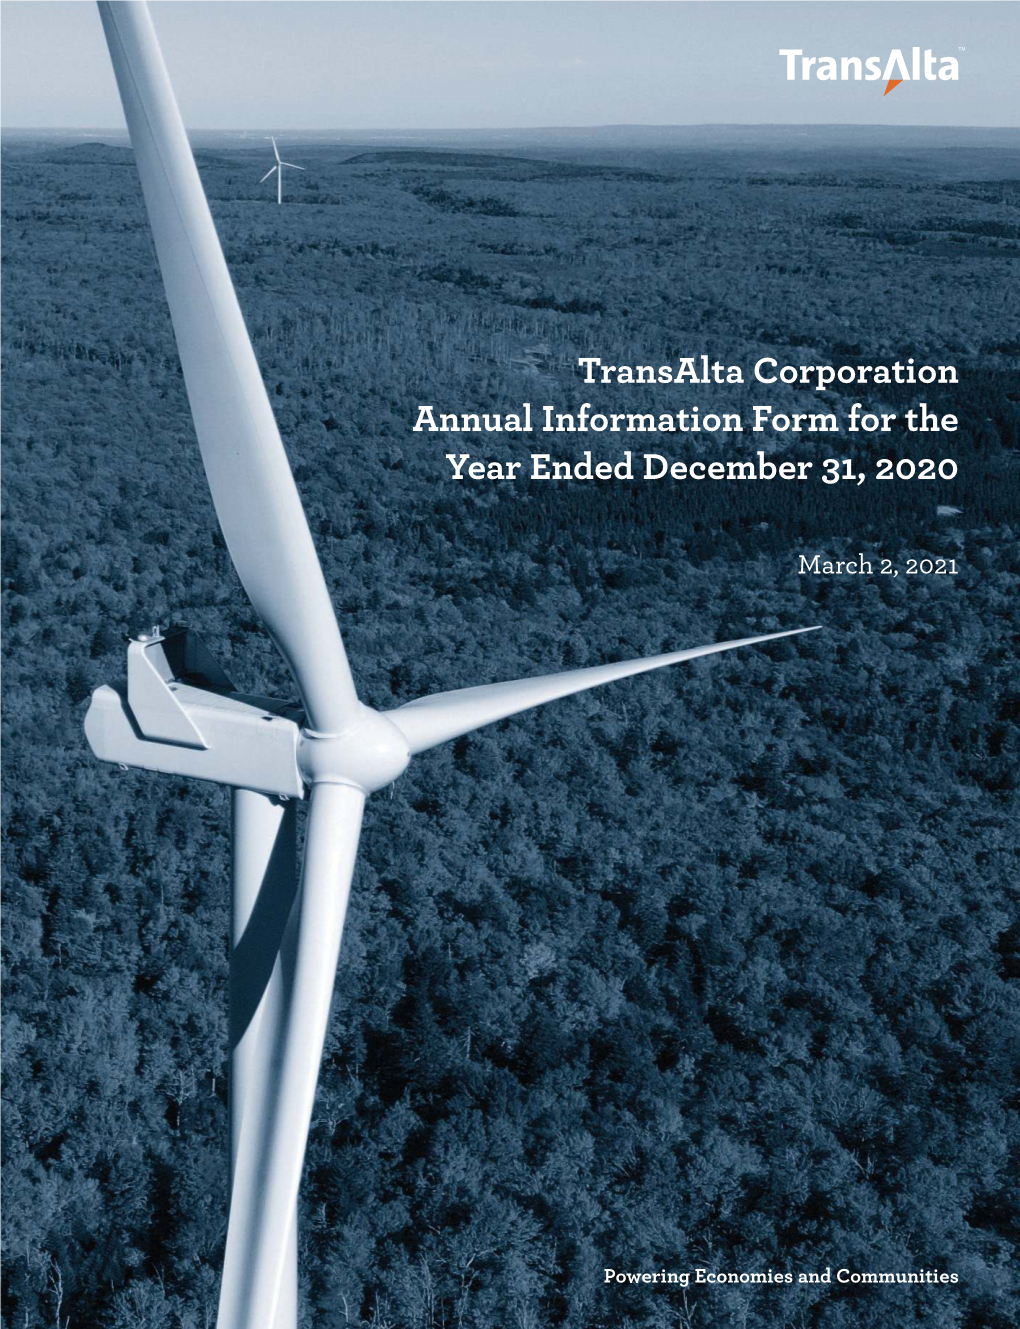 Transalta Corporation Annual Information Form for the Year Ended December 31, 2020